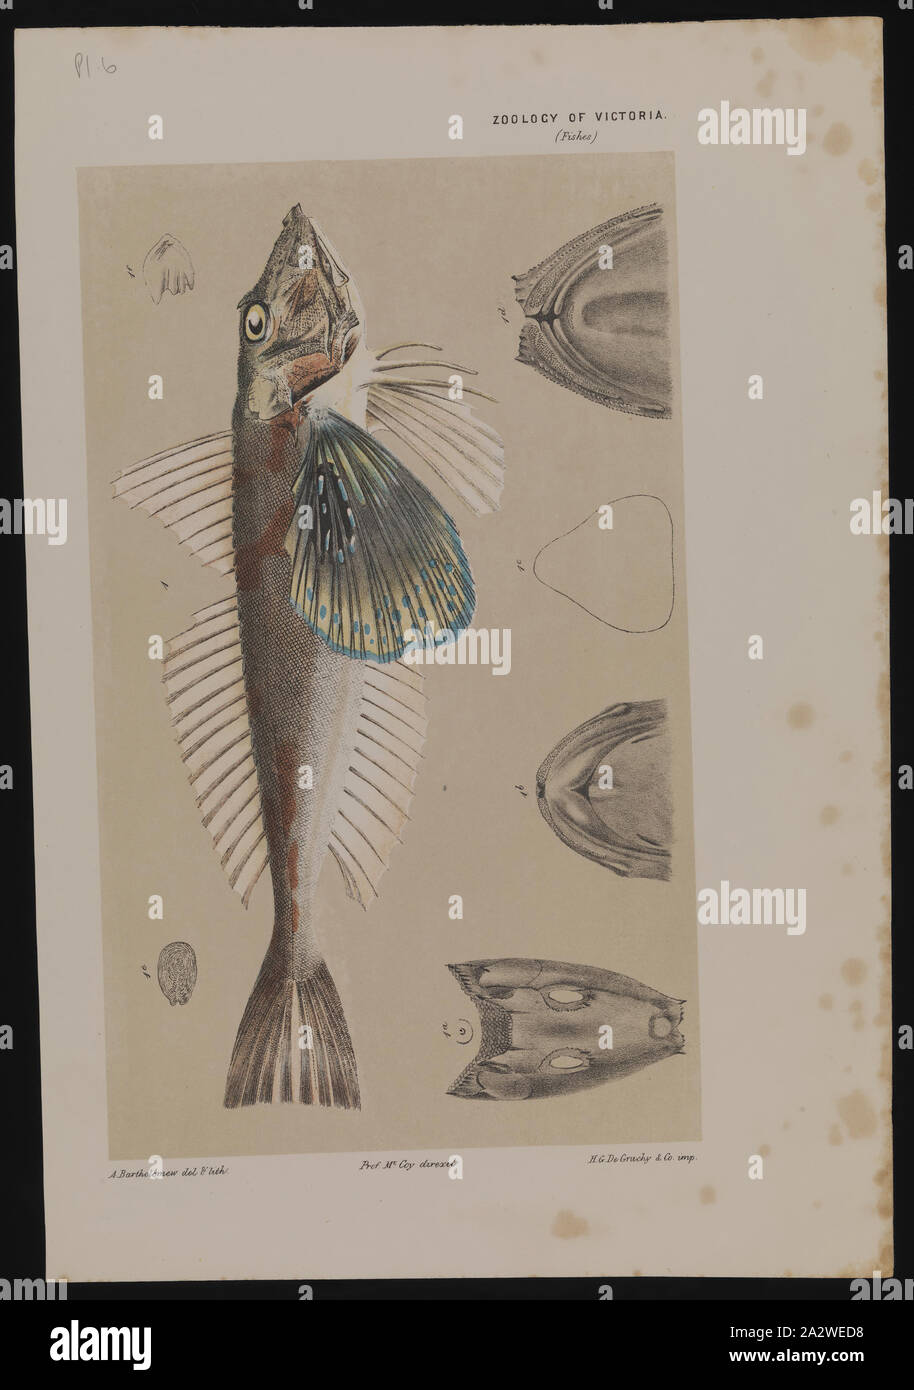 Lithographic proof - Red Gurnard, Chelidonichthys kumu, Arthur Bartholomew, Colour proof for Plate 6 in The Prodromus of the Zoology of Victoria by Frederick McCoy. This plate forms part of the much larger Prodromus Collection. Many of the original illustrations in the collection informed the production of the two volume work 'The Prodromus of the Zoology of Victoria', Museum Victoria's first major publication commencing in 1878 Stock Photo